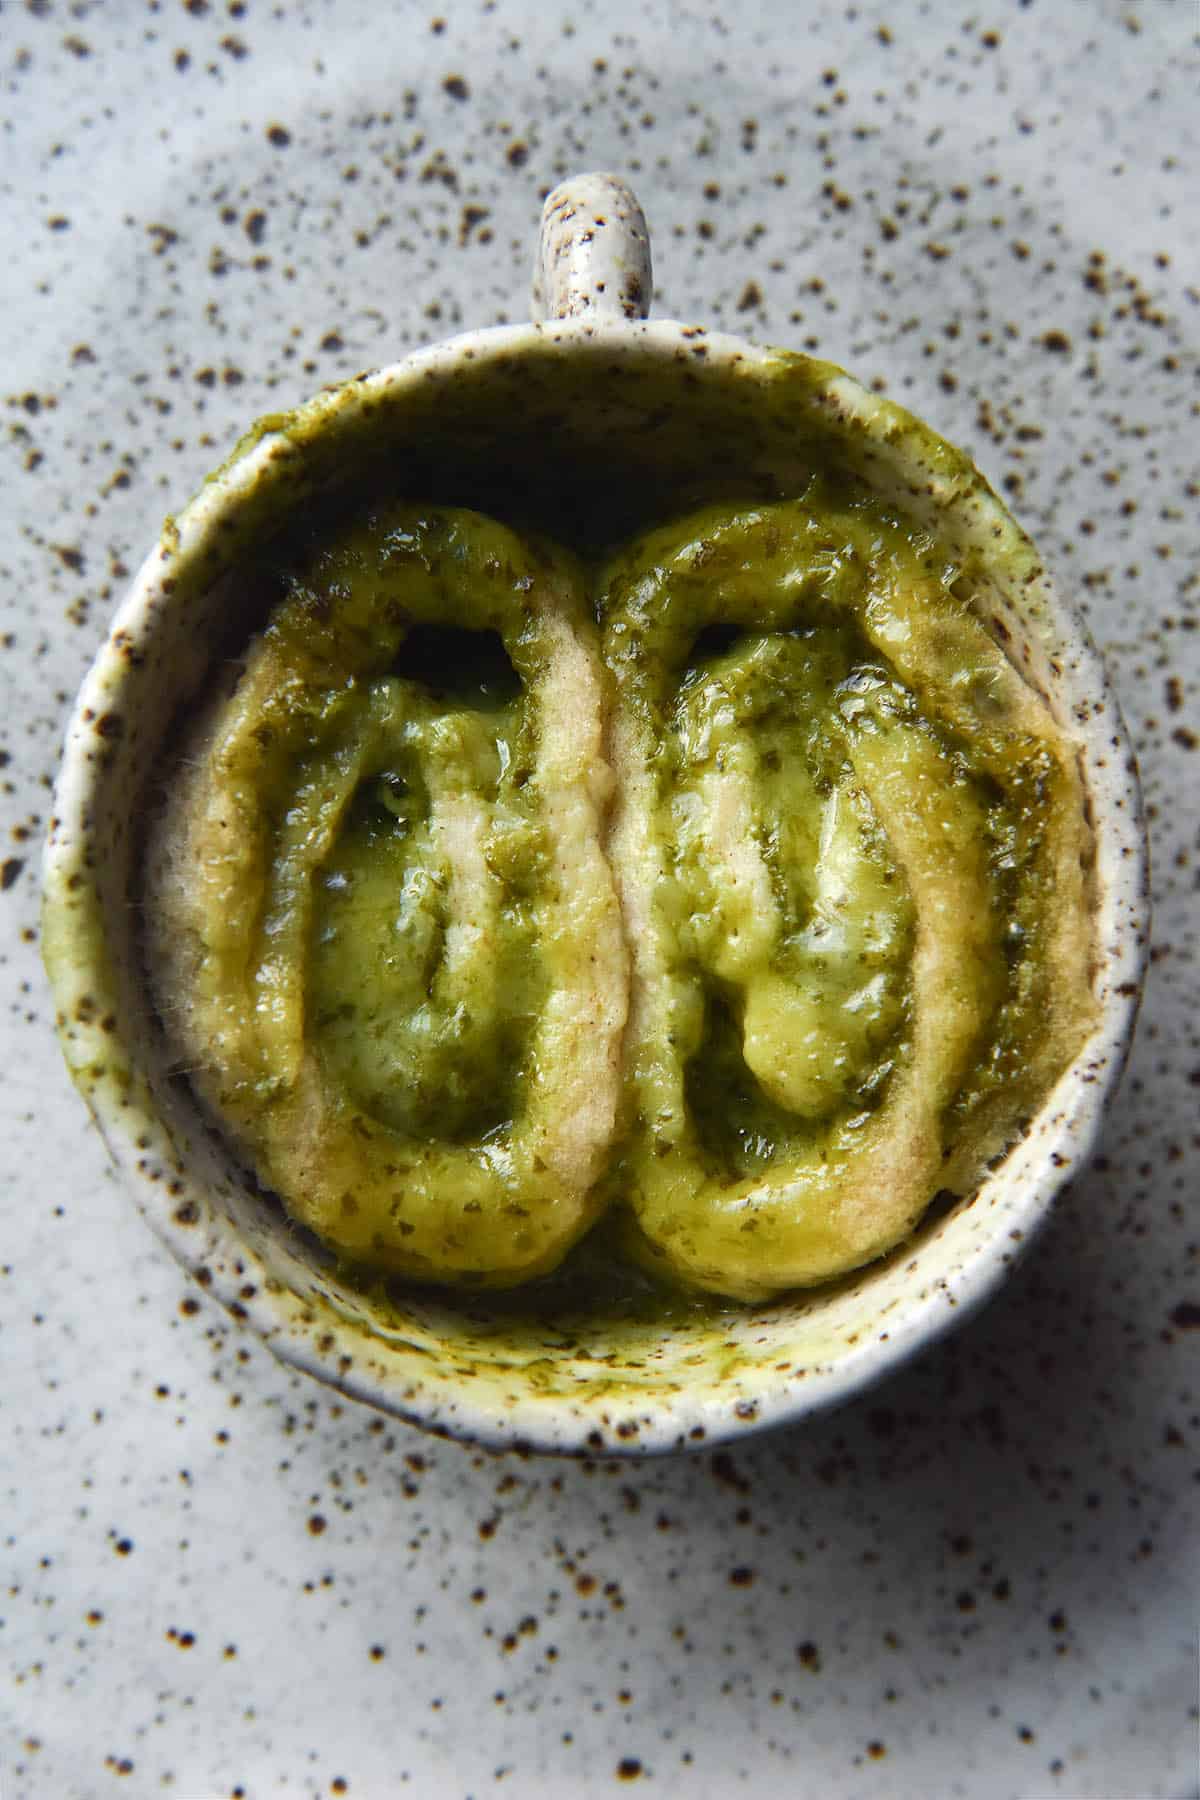 An aerial close up photo of a pesto scroll mug cake in a white speckled ceramic mug on a white speckled ceramic plate. The scroll has been sliced into two before baking, leaving two scrolls snuggled into eachother and facing upwards in the mug. The pesto and cheese have melted together to create an oozy, gooey and delicious swirled result